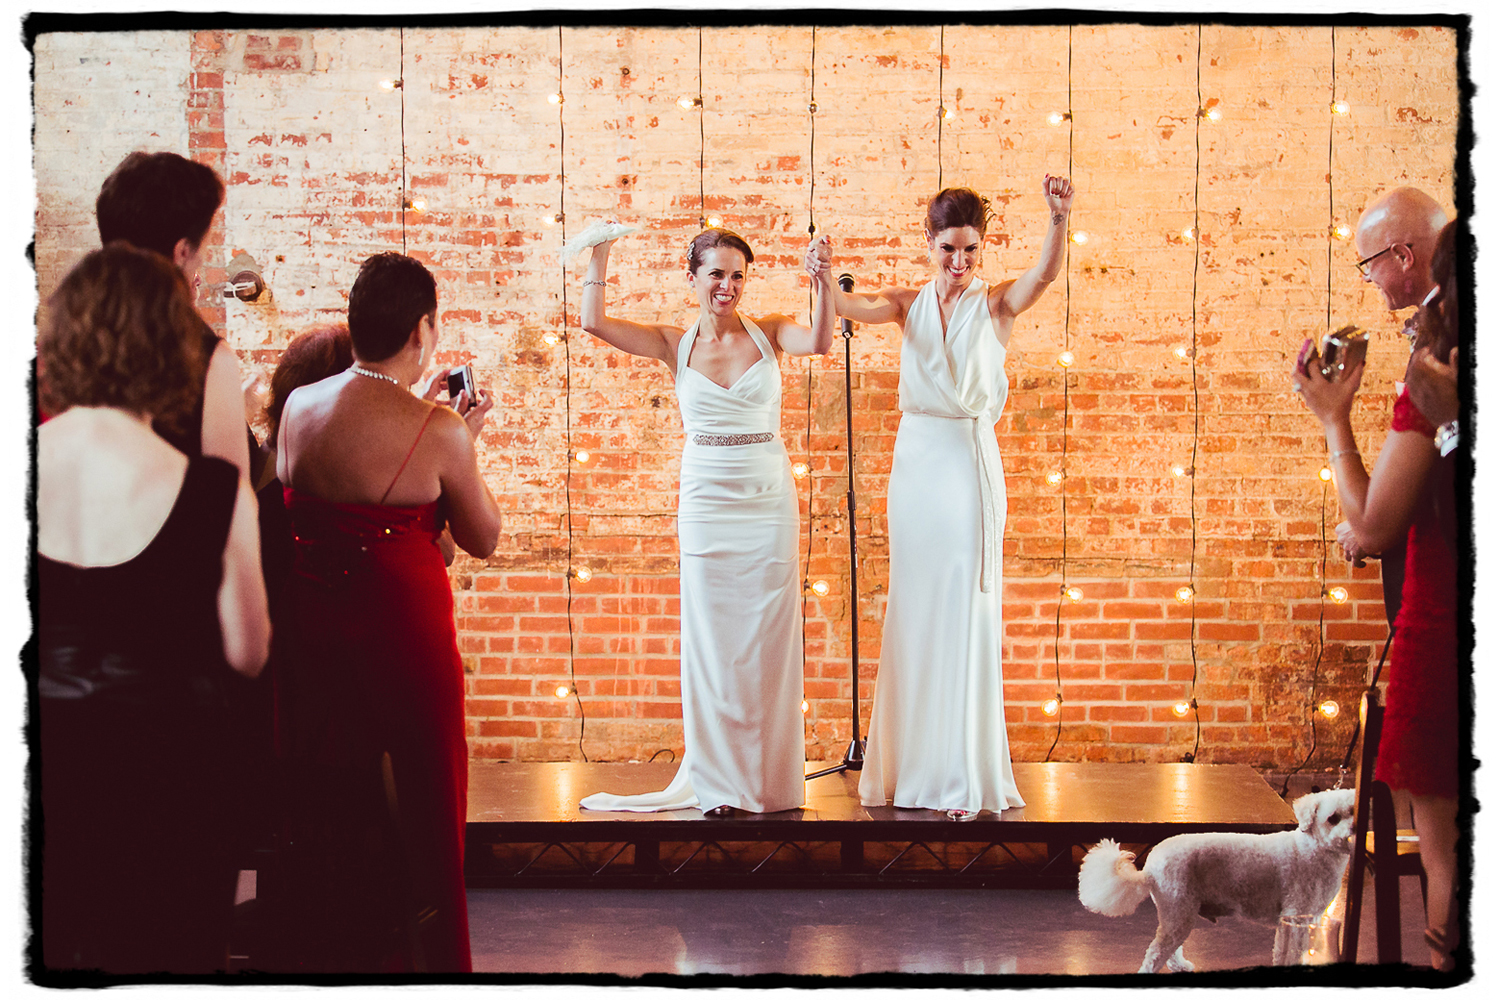 Lara & Nicole were married at The Green Building in front of a brick wall illuminated by hanging string lights.